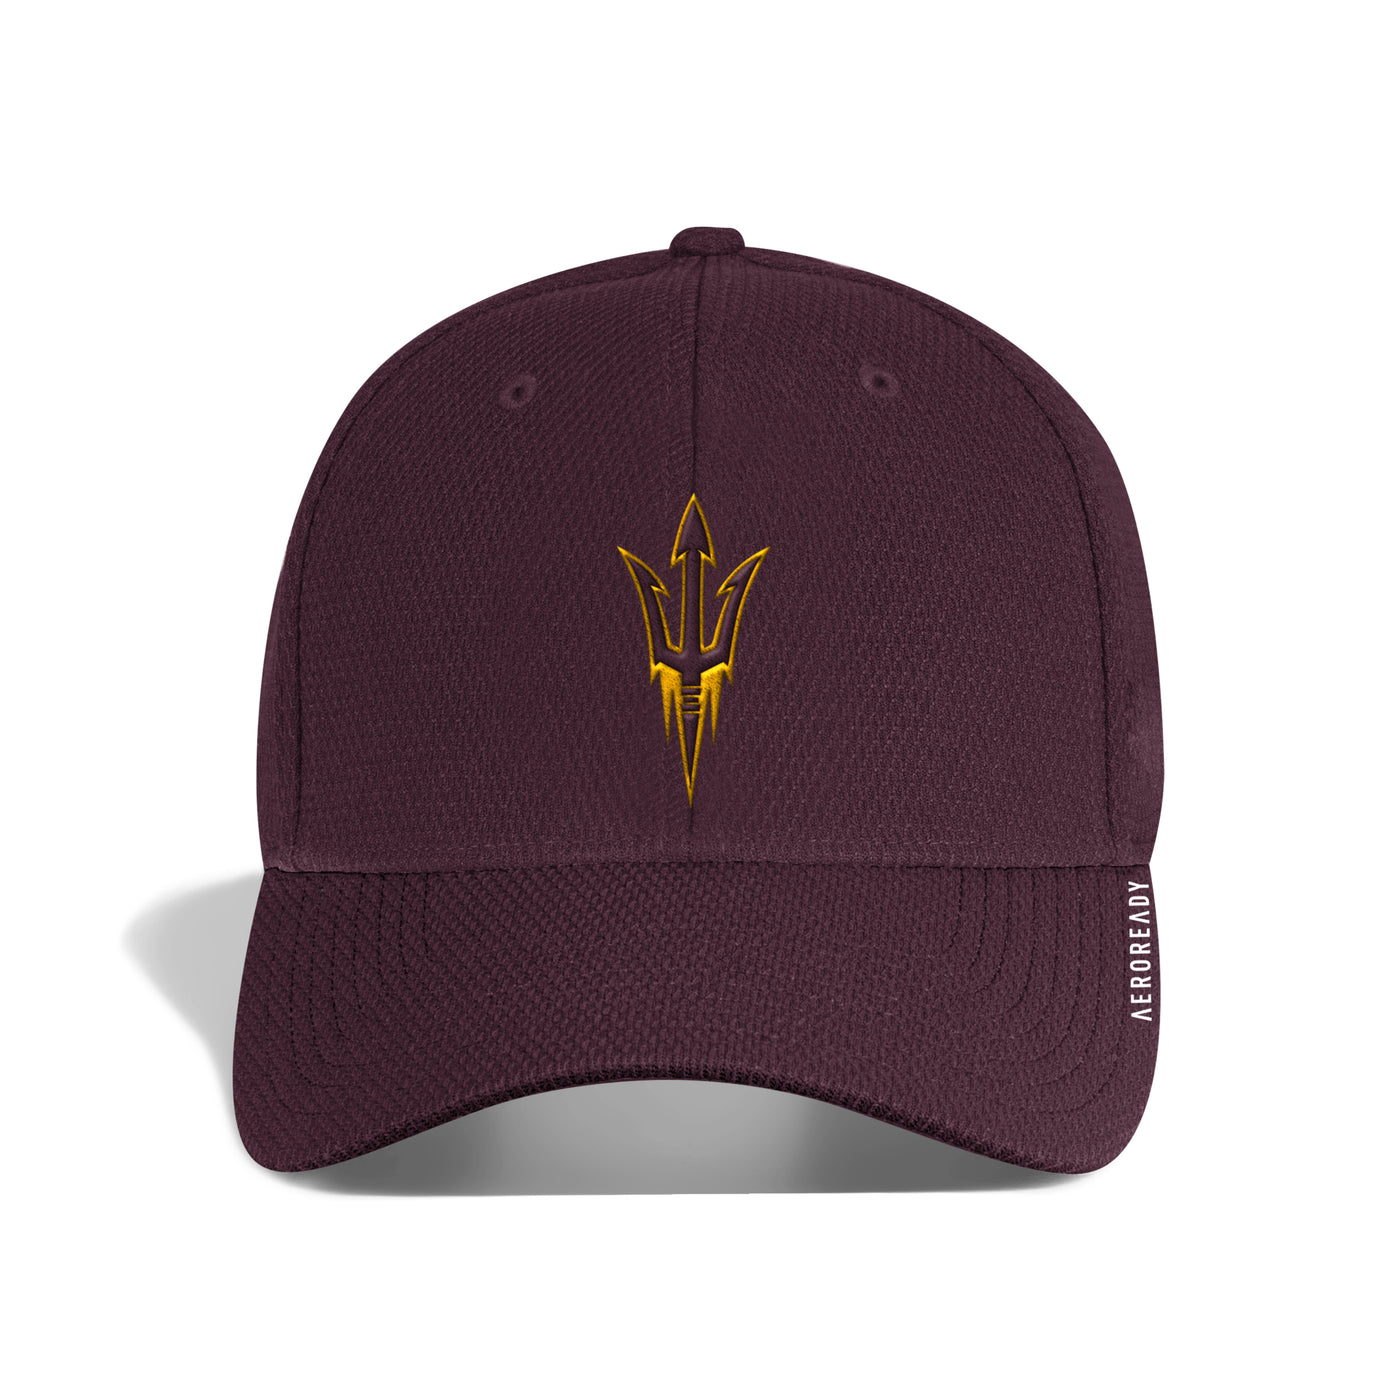 ASU maroon hat with curved bill and a pitchfork logo on front panel.